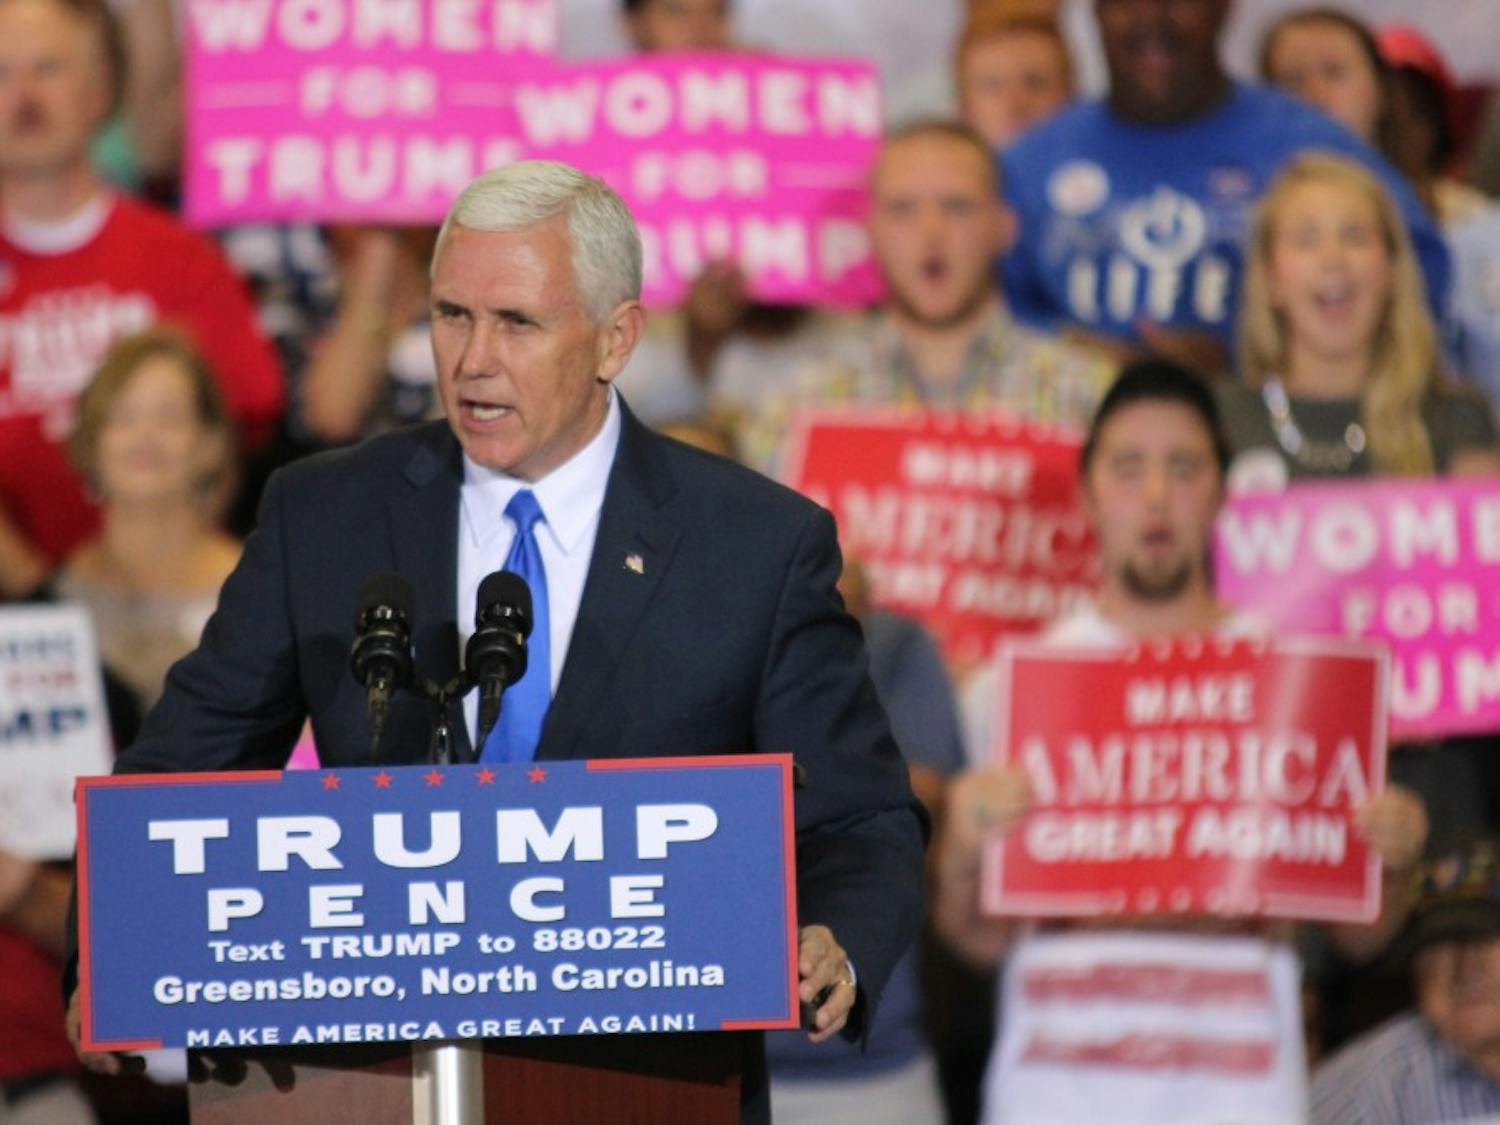 Republican vice presidential nominee&nbsp;Mike Pence&nbsp;spoke at a rally in Greensboro on Monday.